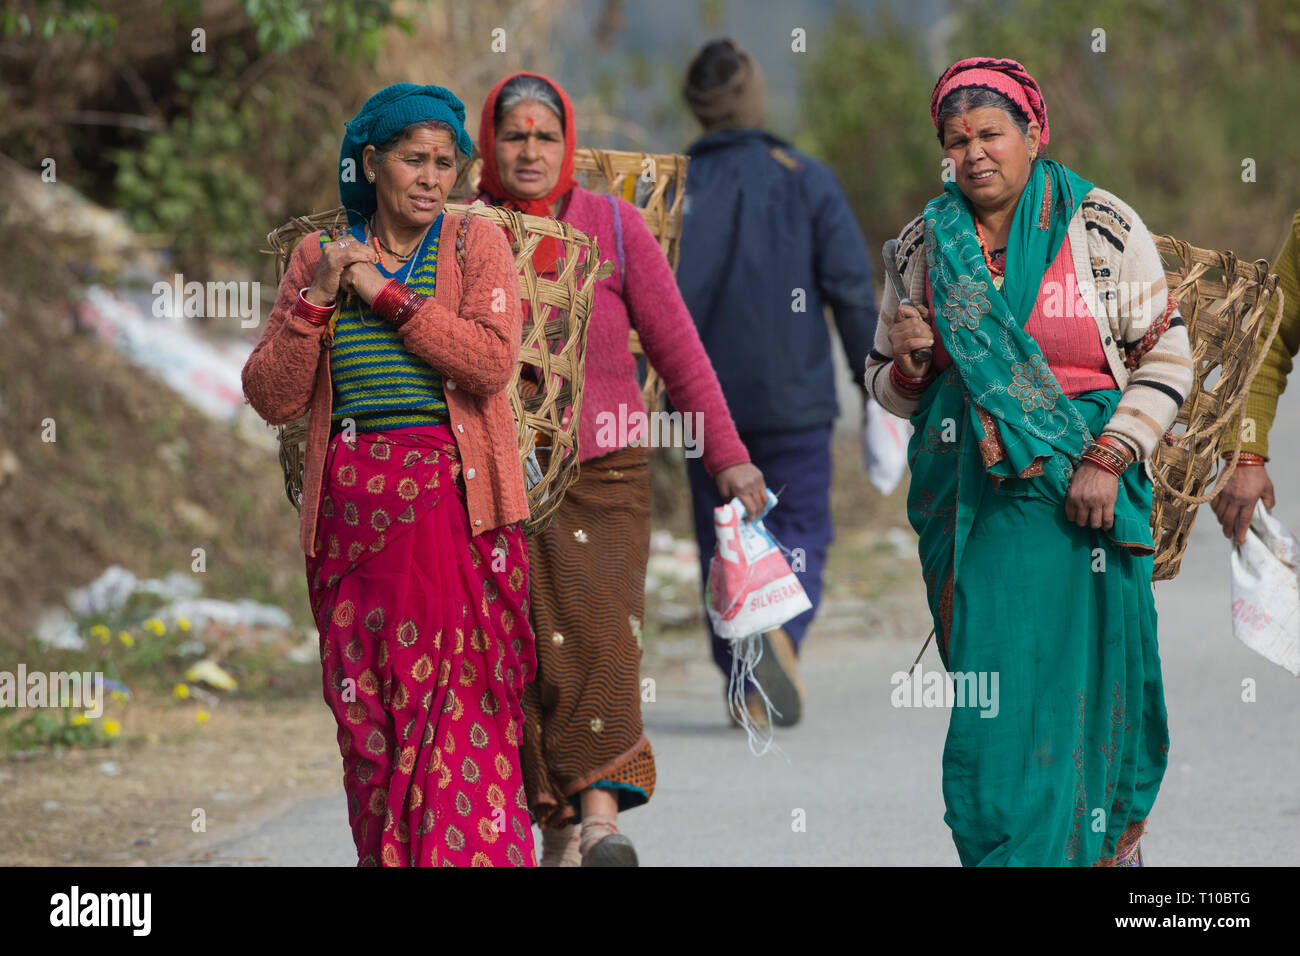 Three women wearing knitted wool clothing and head covering. Bindi, tika or tikka, mark on the forehead. Walking to work, empty woven baskets on their backs to harvest crops in nearby fields. Northern India. Winter. Stock Photo